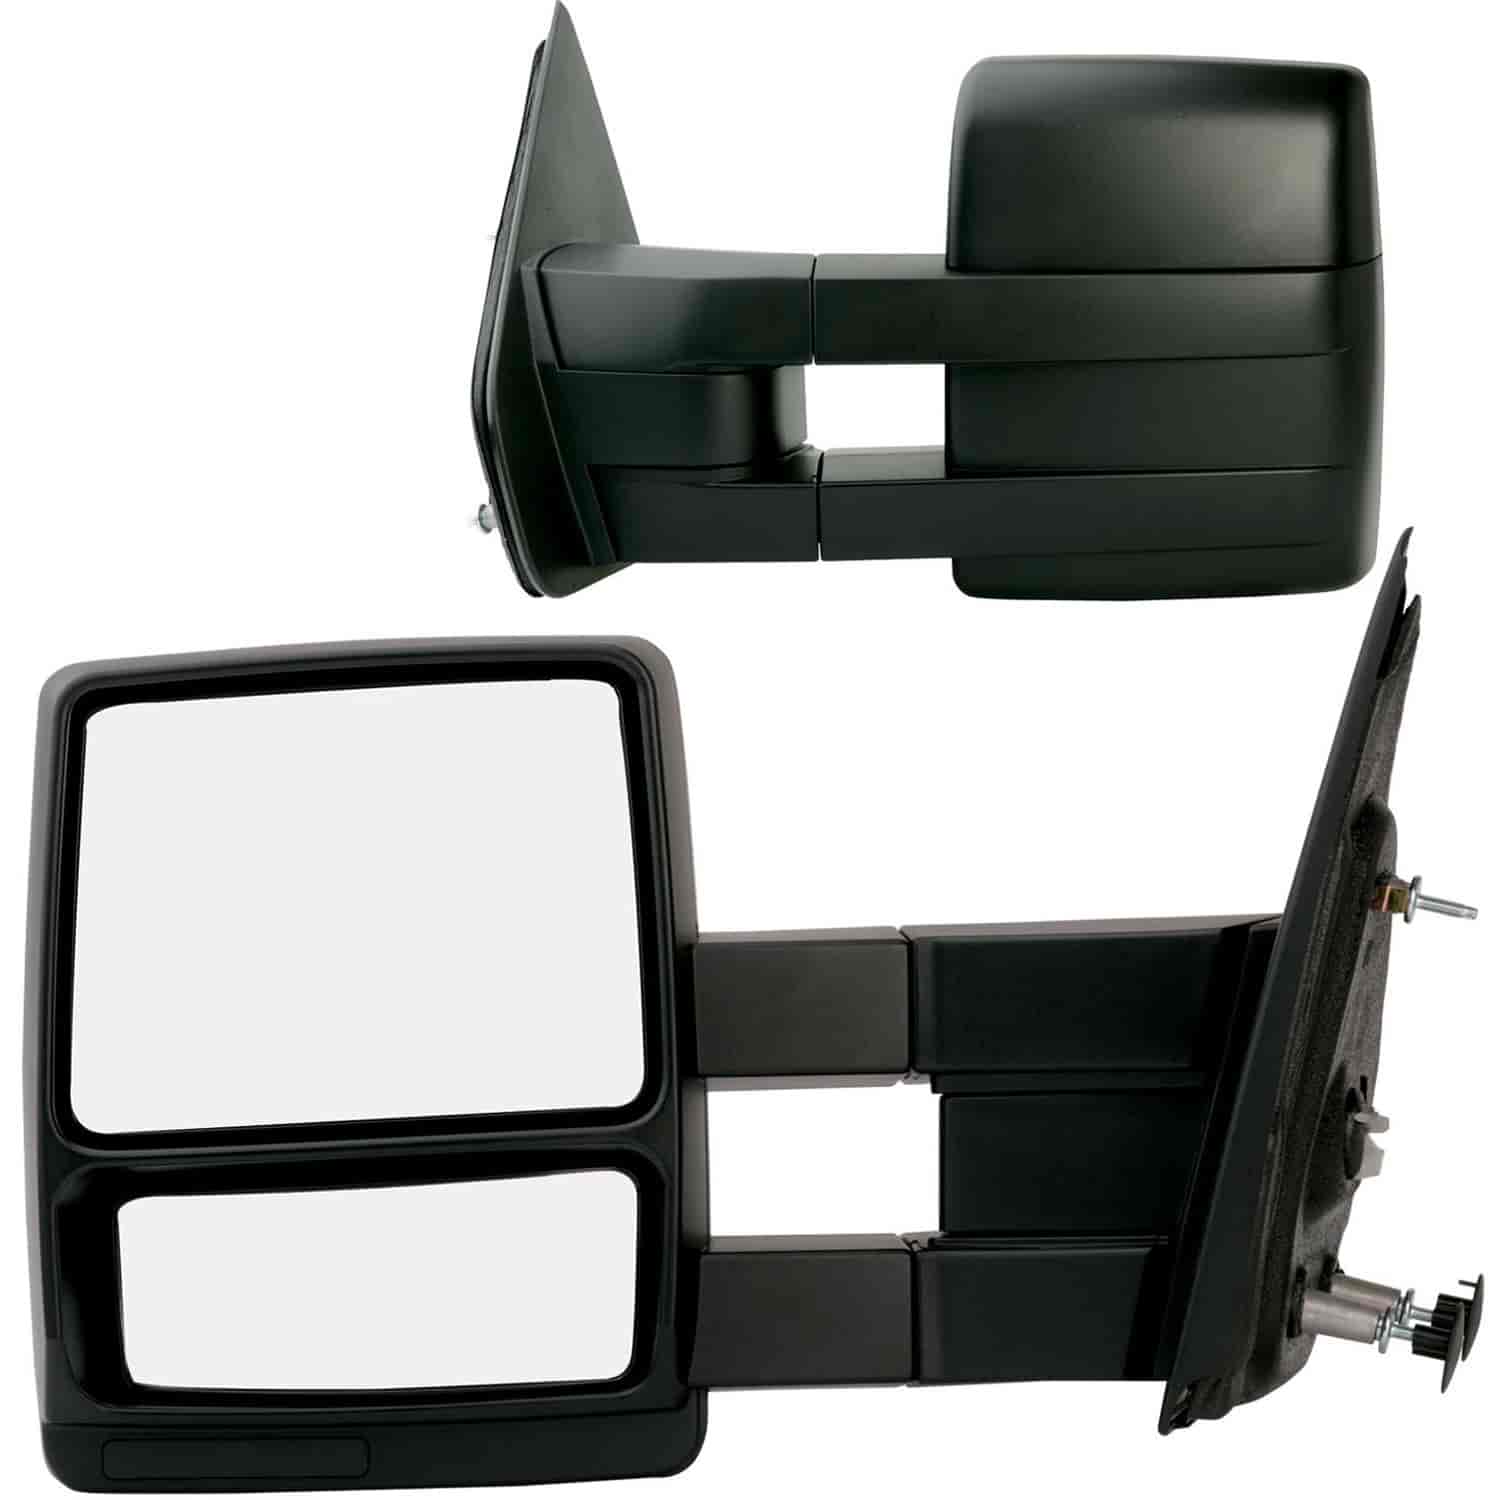 OEM Style Replacement mirror for 04-14 Ford F150